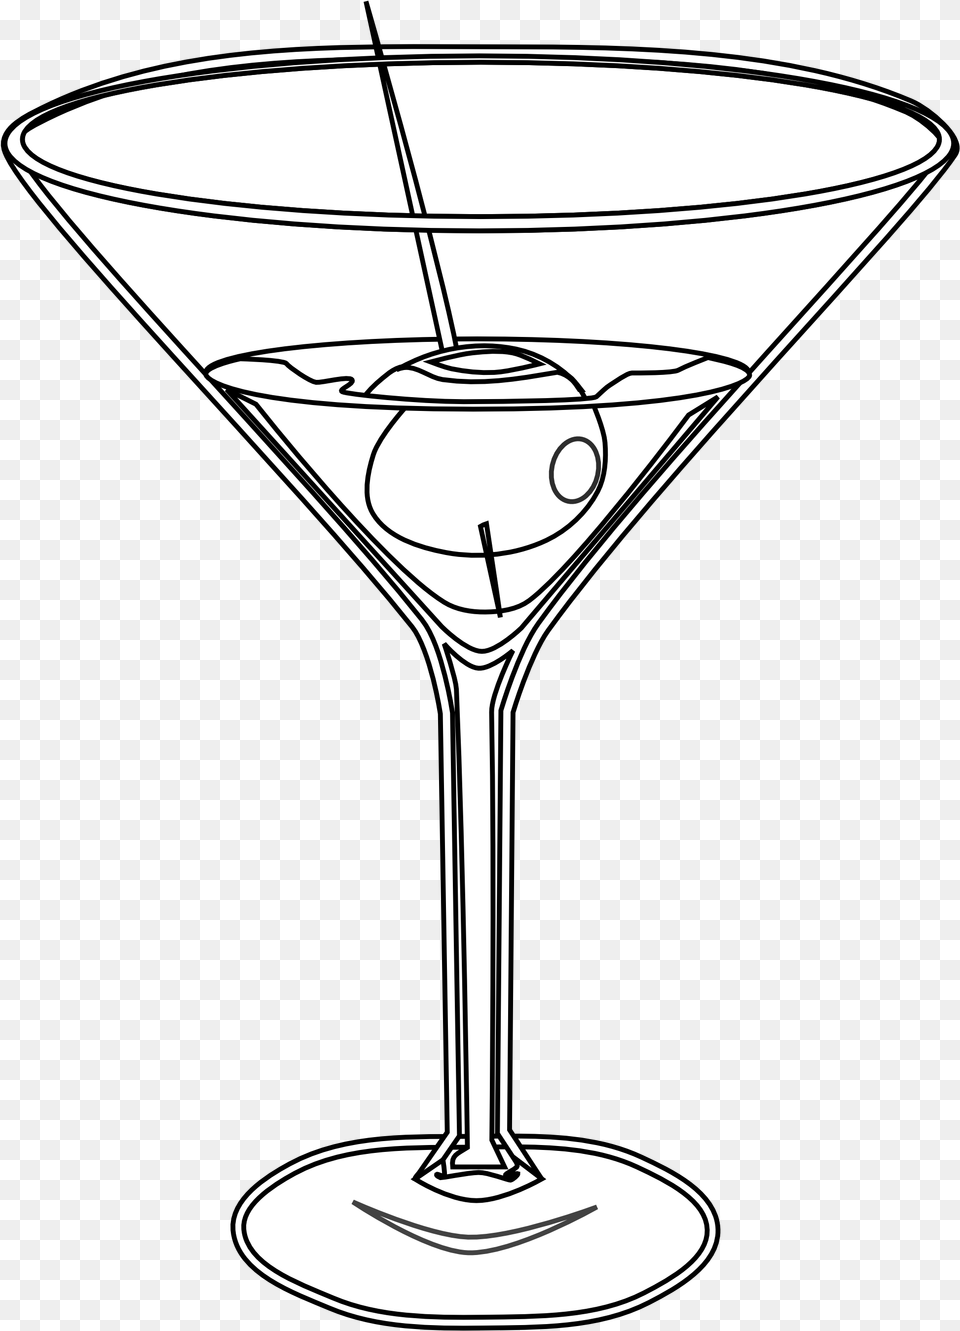 Food Martini Martini Black White Line Art Scalable Cocktail Glass White, Alcohol, Beverage Free Png